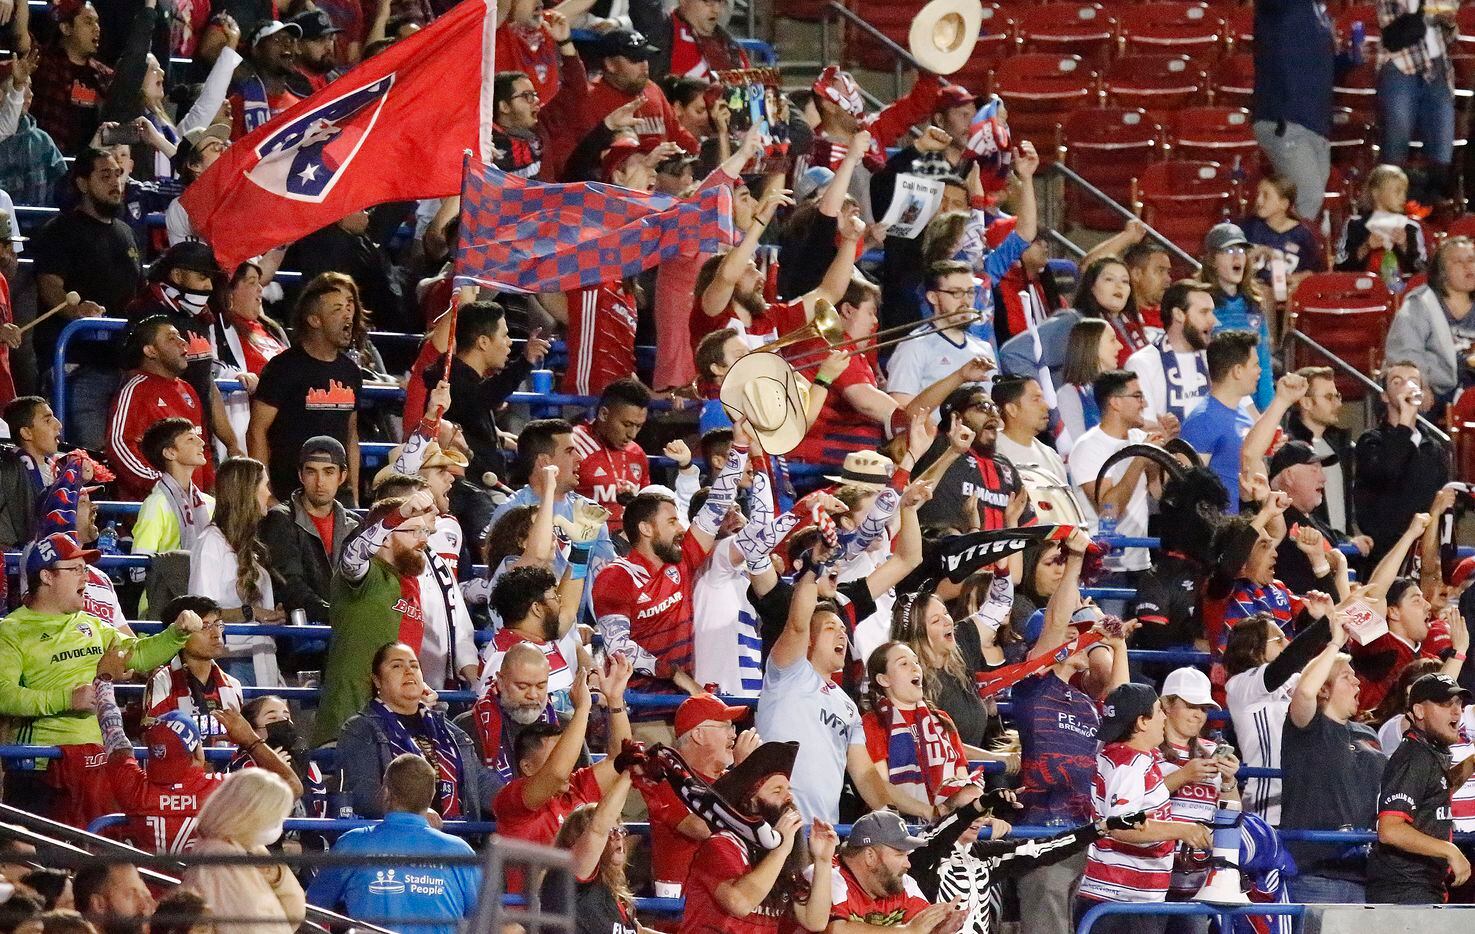 FC Dallas fans celebrate after bringing the score to a tie during the first half as FC Dallas hosted Austin FC at Toyota Stadium in Frisco on Saturday, October 30, 2021. (Stewart F. House/Special Contributor)